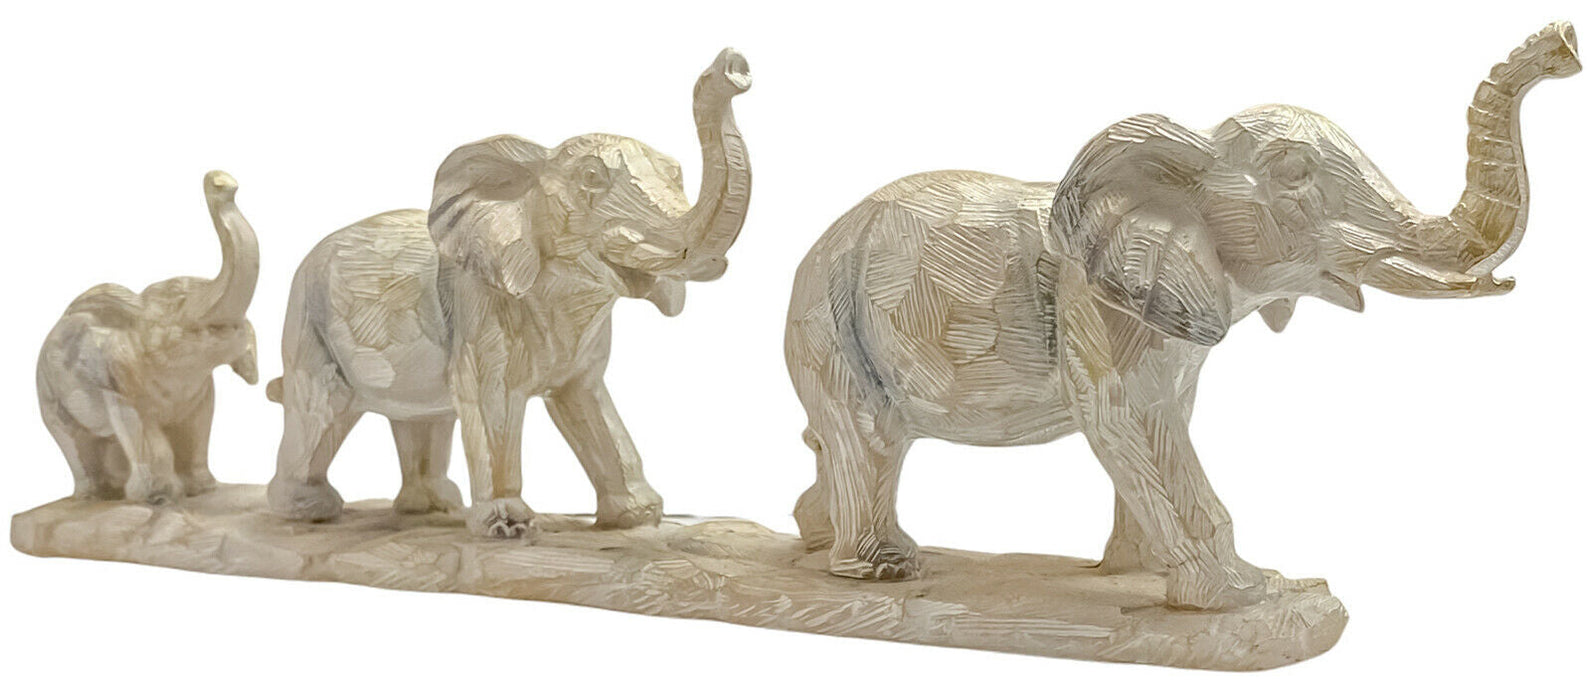 Brown Elephant Family Ornament Driftwood Effect Sculpture Resin Animal Figurine